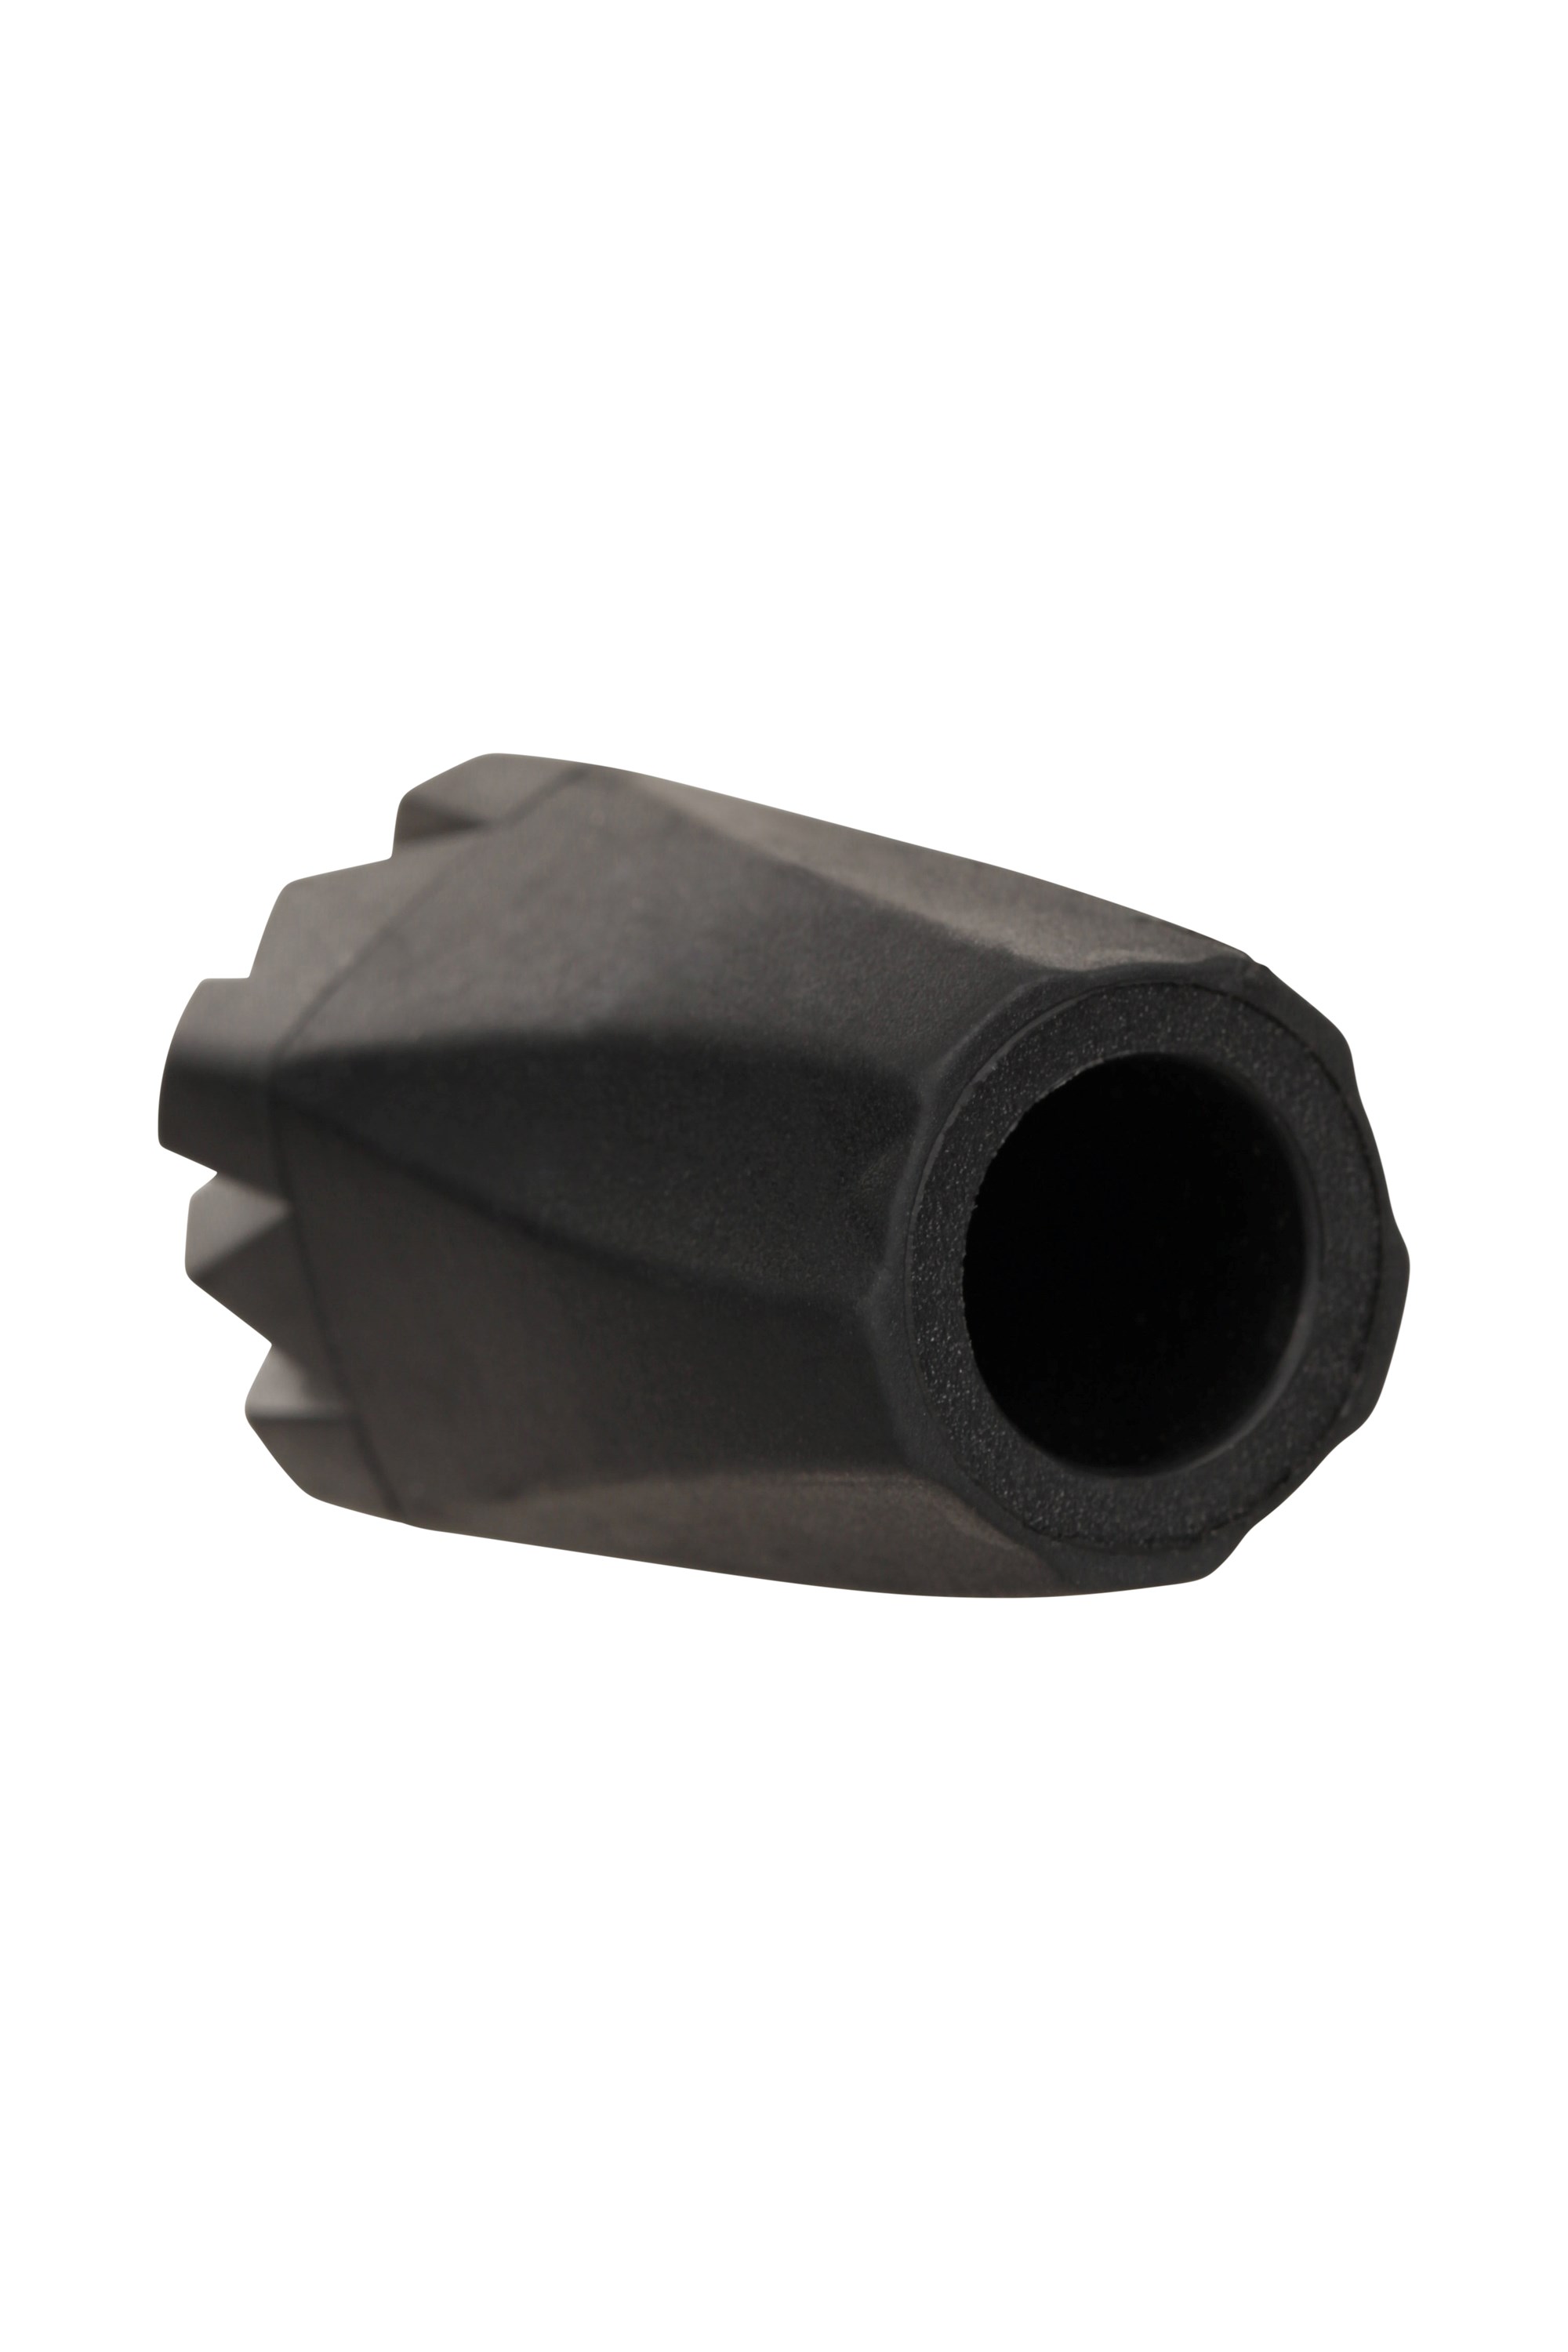 Replacement Rubber Ferrules 